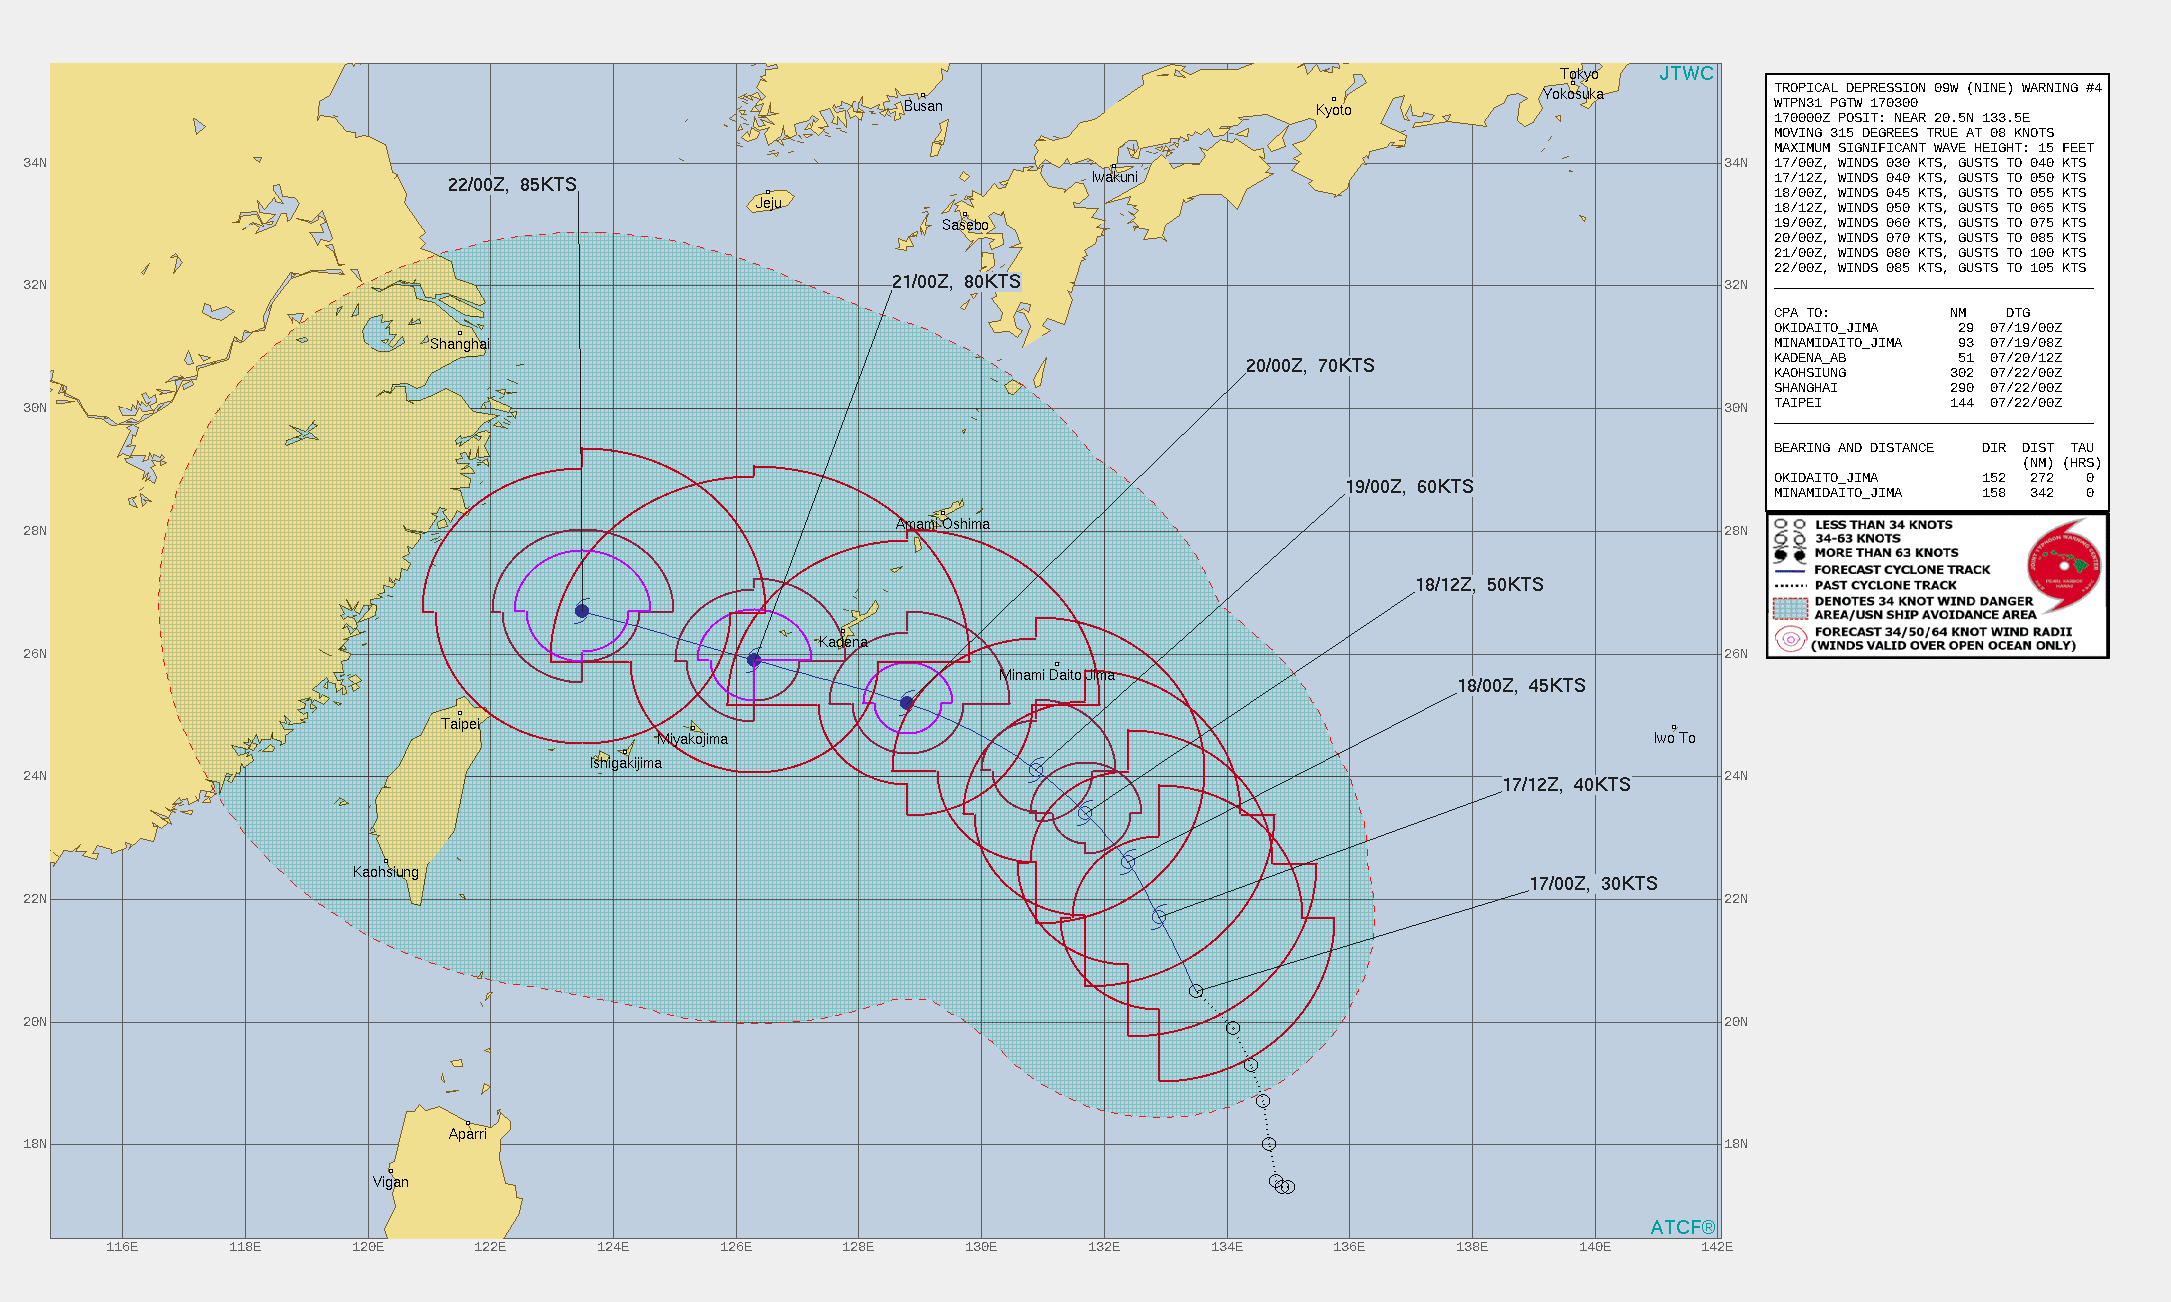 TD 09W. WARNING 5 ISSUED AT 17/09UTC.SIGNIFICANT FORECAST CHANGES: THERE ARE NO SIGNIFICANT CHANGES TO THE FORECAST FROM THE PREVIOUS WARNING. FORECAST DISCUSSION: TD 09W IS TRACKING NORTHWESTWARD ALONG THE PERIPHERY OF THE SUBTROPICAL RIDGE(STR) BUT IS EXPECTED TO GRADUALLY TURN WEST-NORTHWESTWARD AS A DEEP UPPER LOW CURRENTLY LOCATED WEST OF KYUSHU FILLS AND SHIFTS WEST ALLOWING THE STR TO BUILD OVER THE EAST CHINA SEA BY 48H. TD 09W IS CURRENTLY STRUGGLING TO CONSOLIDATE DUE PRIMARILY TO THE CONVERGENCE ALOFT AND DRY AIR ENTRAINMENT, THEREFORE, TD 09W SHOULD SLOWLY INTENSIFY THROUGH 24H. AFTER 24H, ENVIRONMENTAL CONDITIONS SHOULD GRADUALLY IMPROVE AS THE UPPER LOW AND CONVERGENCE ALOFT WEAKENS ALLOWING THE SYSTEM TO VENT AND SUSTAIN MORE CENTRALIZED DEEP CONVECTION, WHICH WILL MOISTEN THE MID-LEVELS. THIS SHOULD LEAD TO A FASTER RATE OF INTENSIFICATION WITH A PEAK OF 85 KNOTS/CAT2 ANTICIPATED BY 120H.